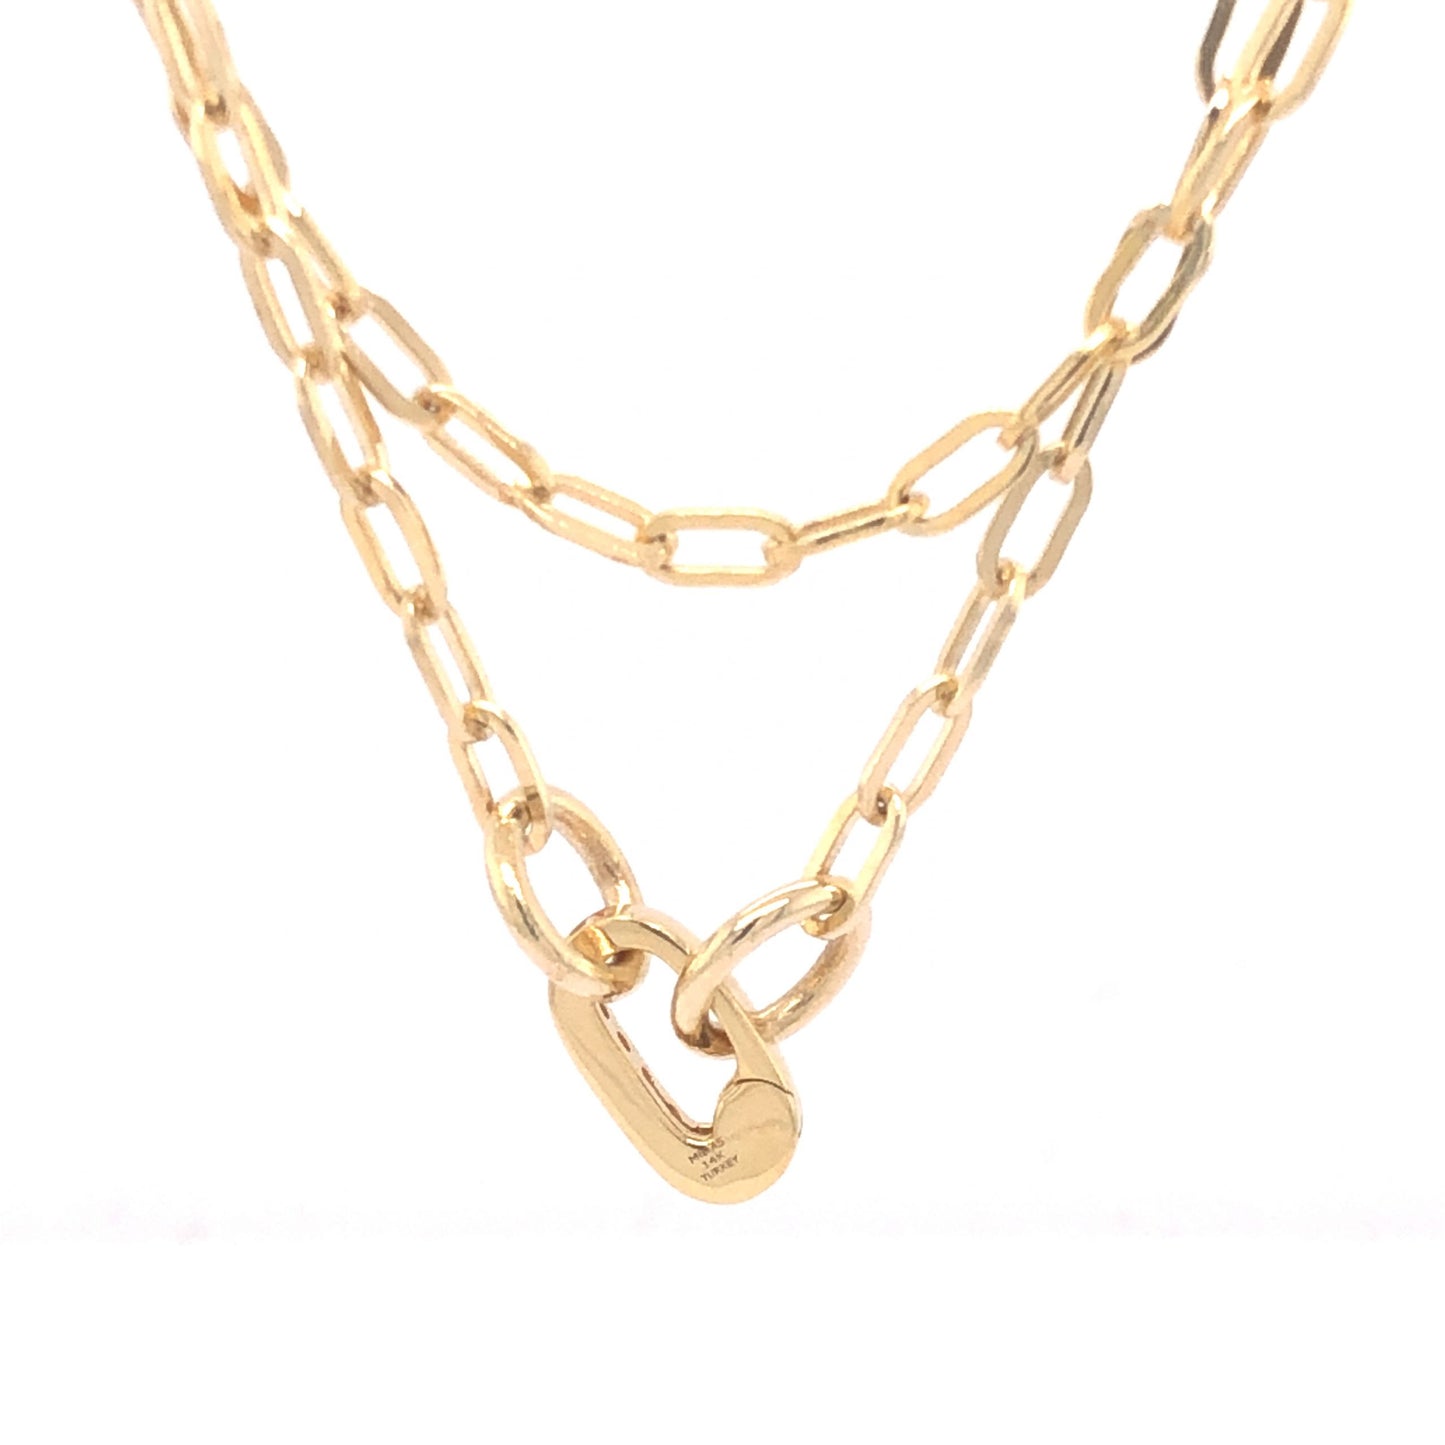 .08 Diamond Clasp Necklace in 14K Yellow Gold